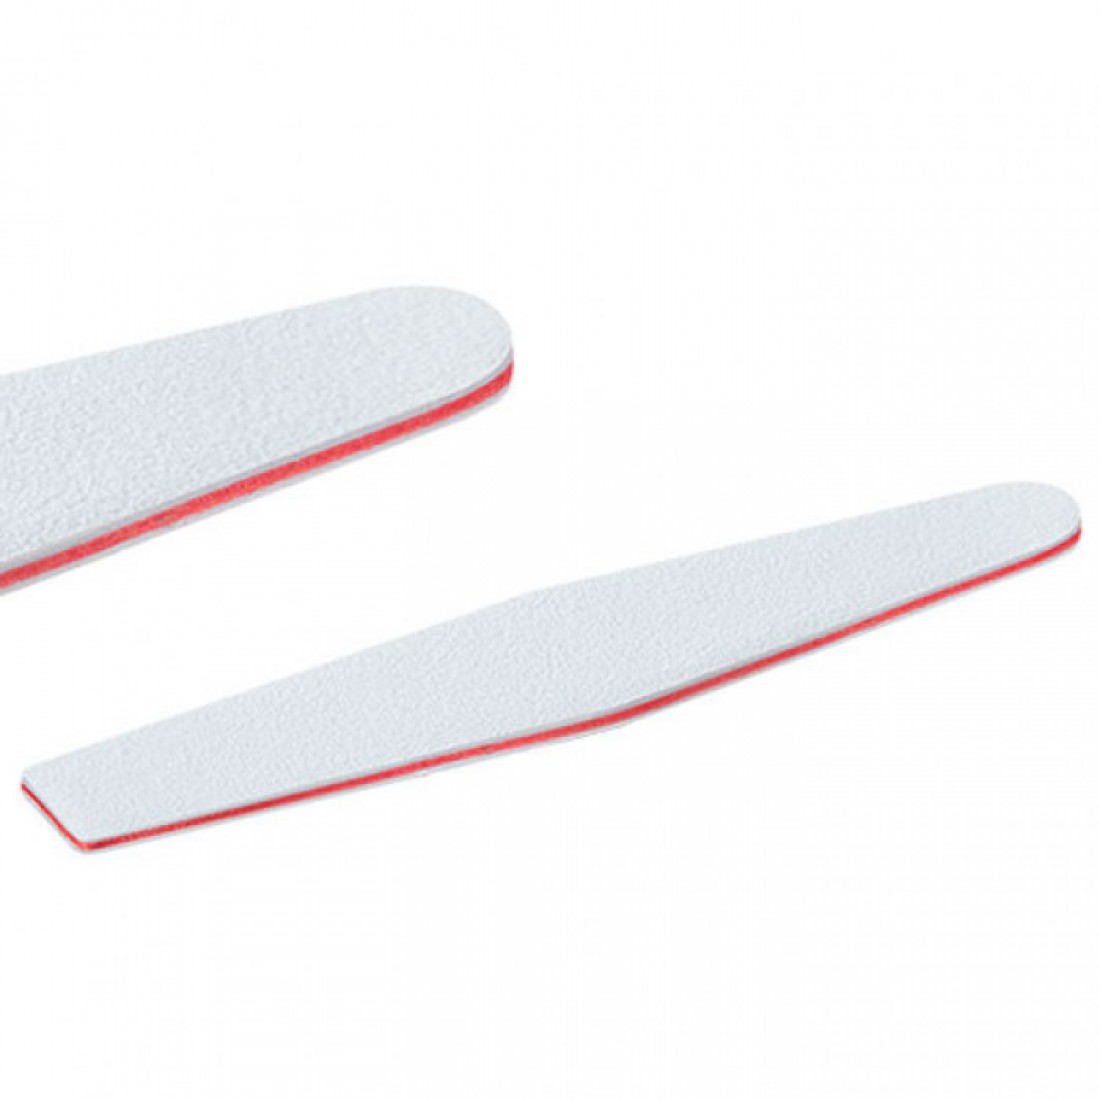 Professional nail file Premium 180/240 grit in White colour - 3280148 NAIL FILES-BUFFER